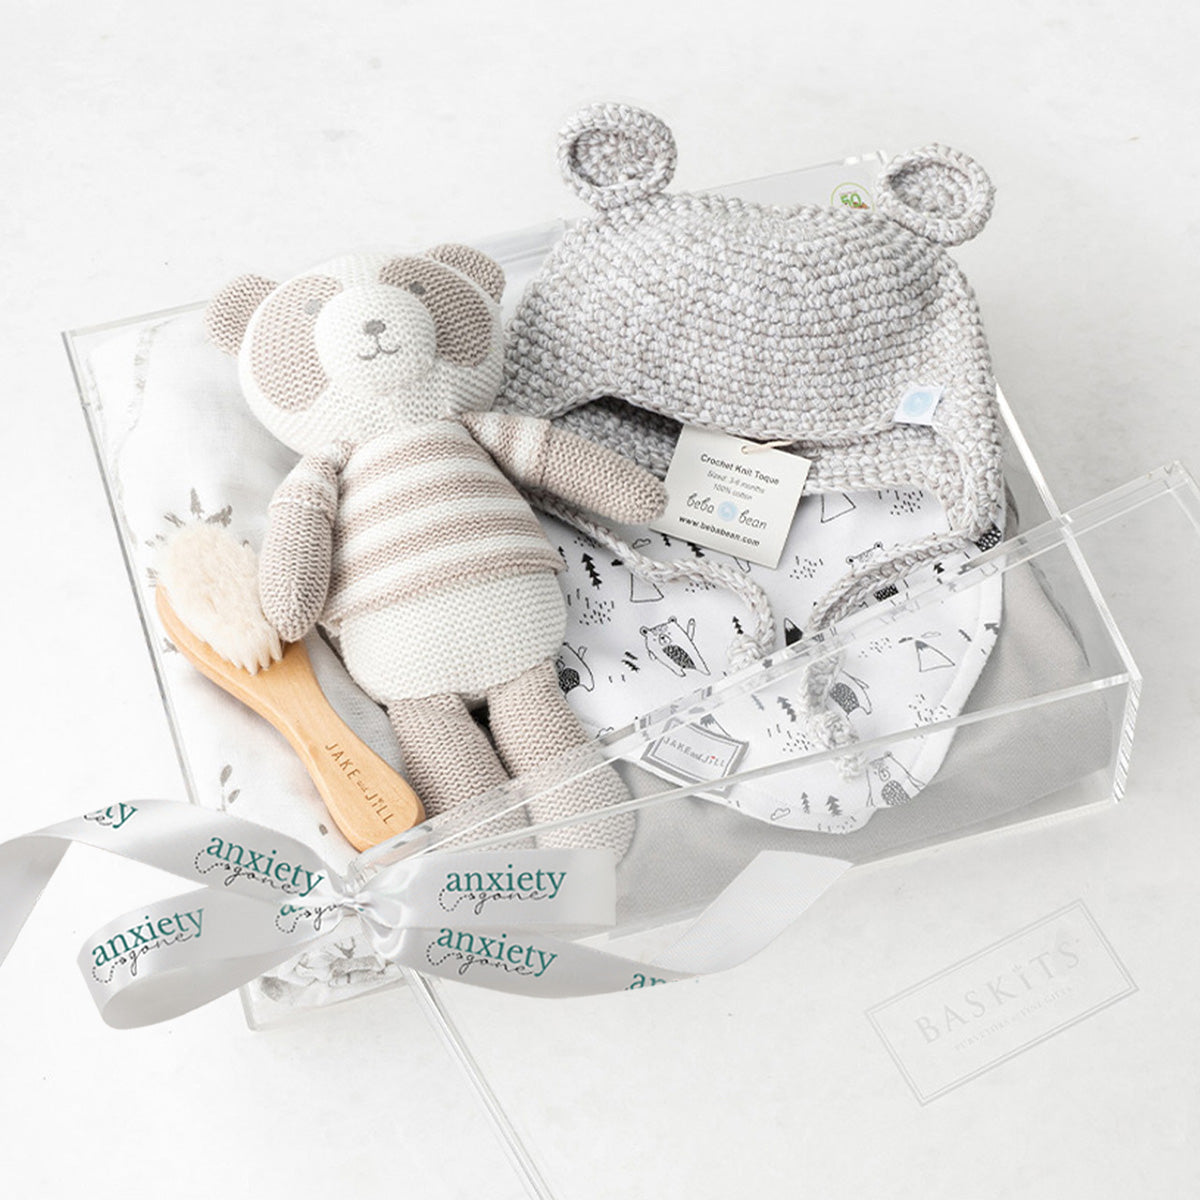 Baby gifts, baby gift baskets, baby shower gifts, christening gifts, personalized baby blankets, new baby gifts, new mom gifts,